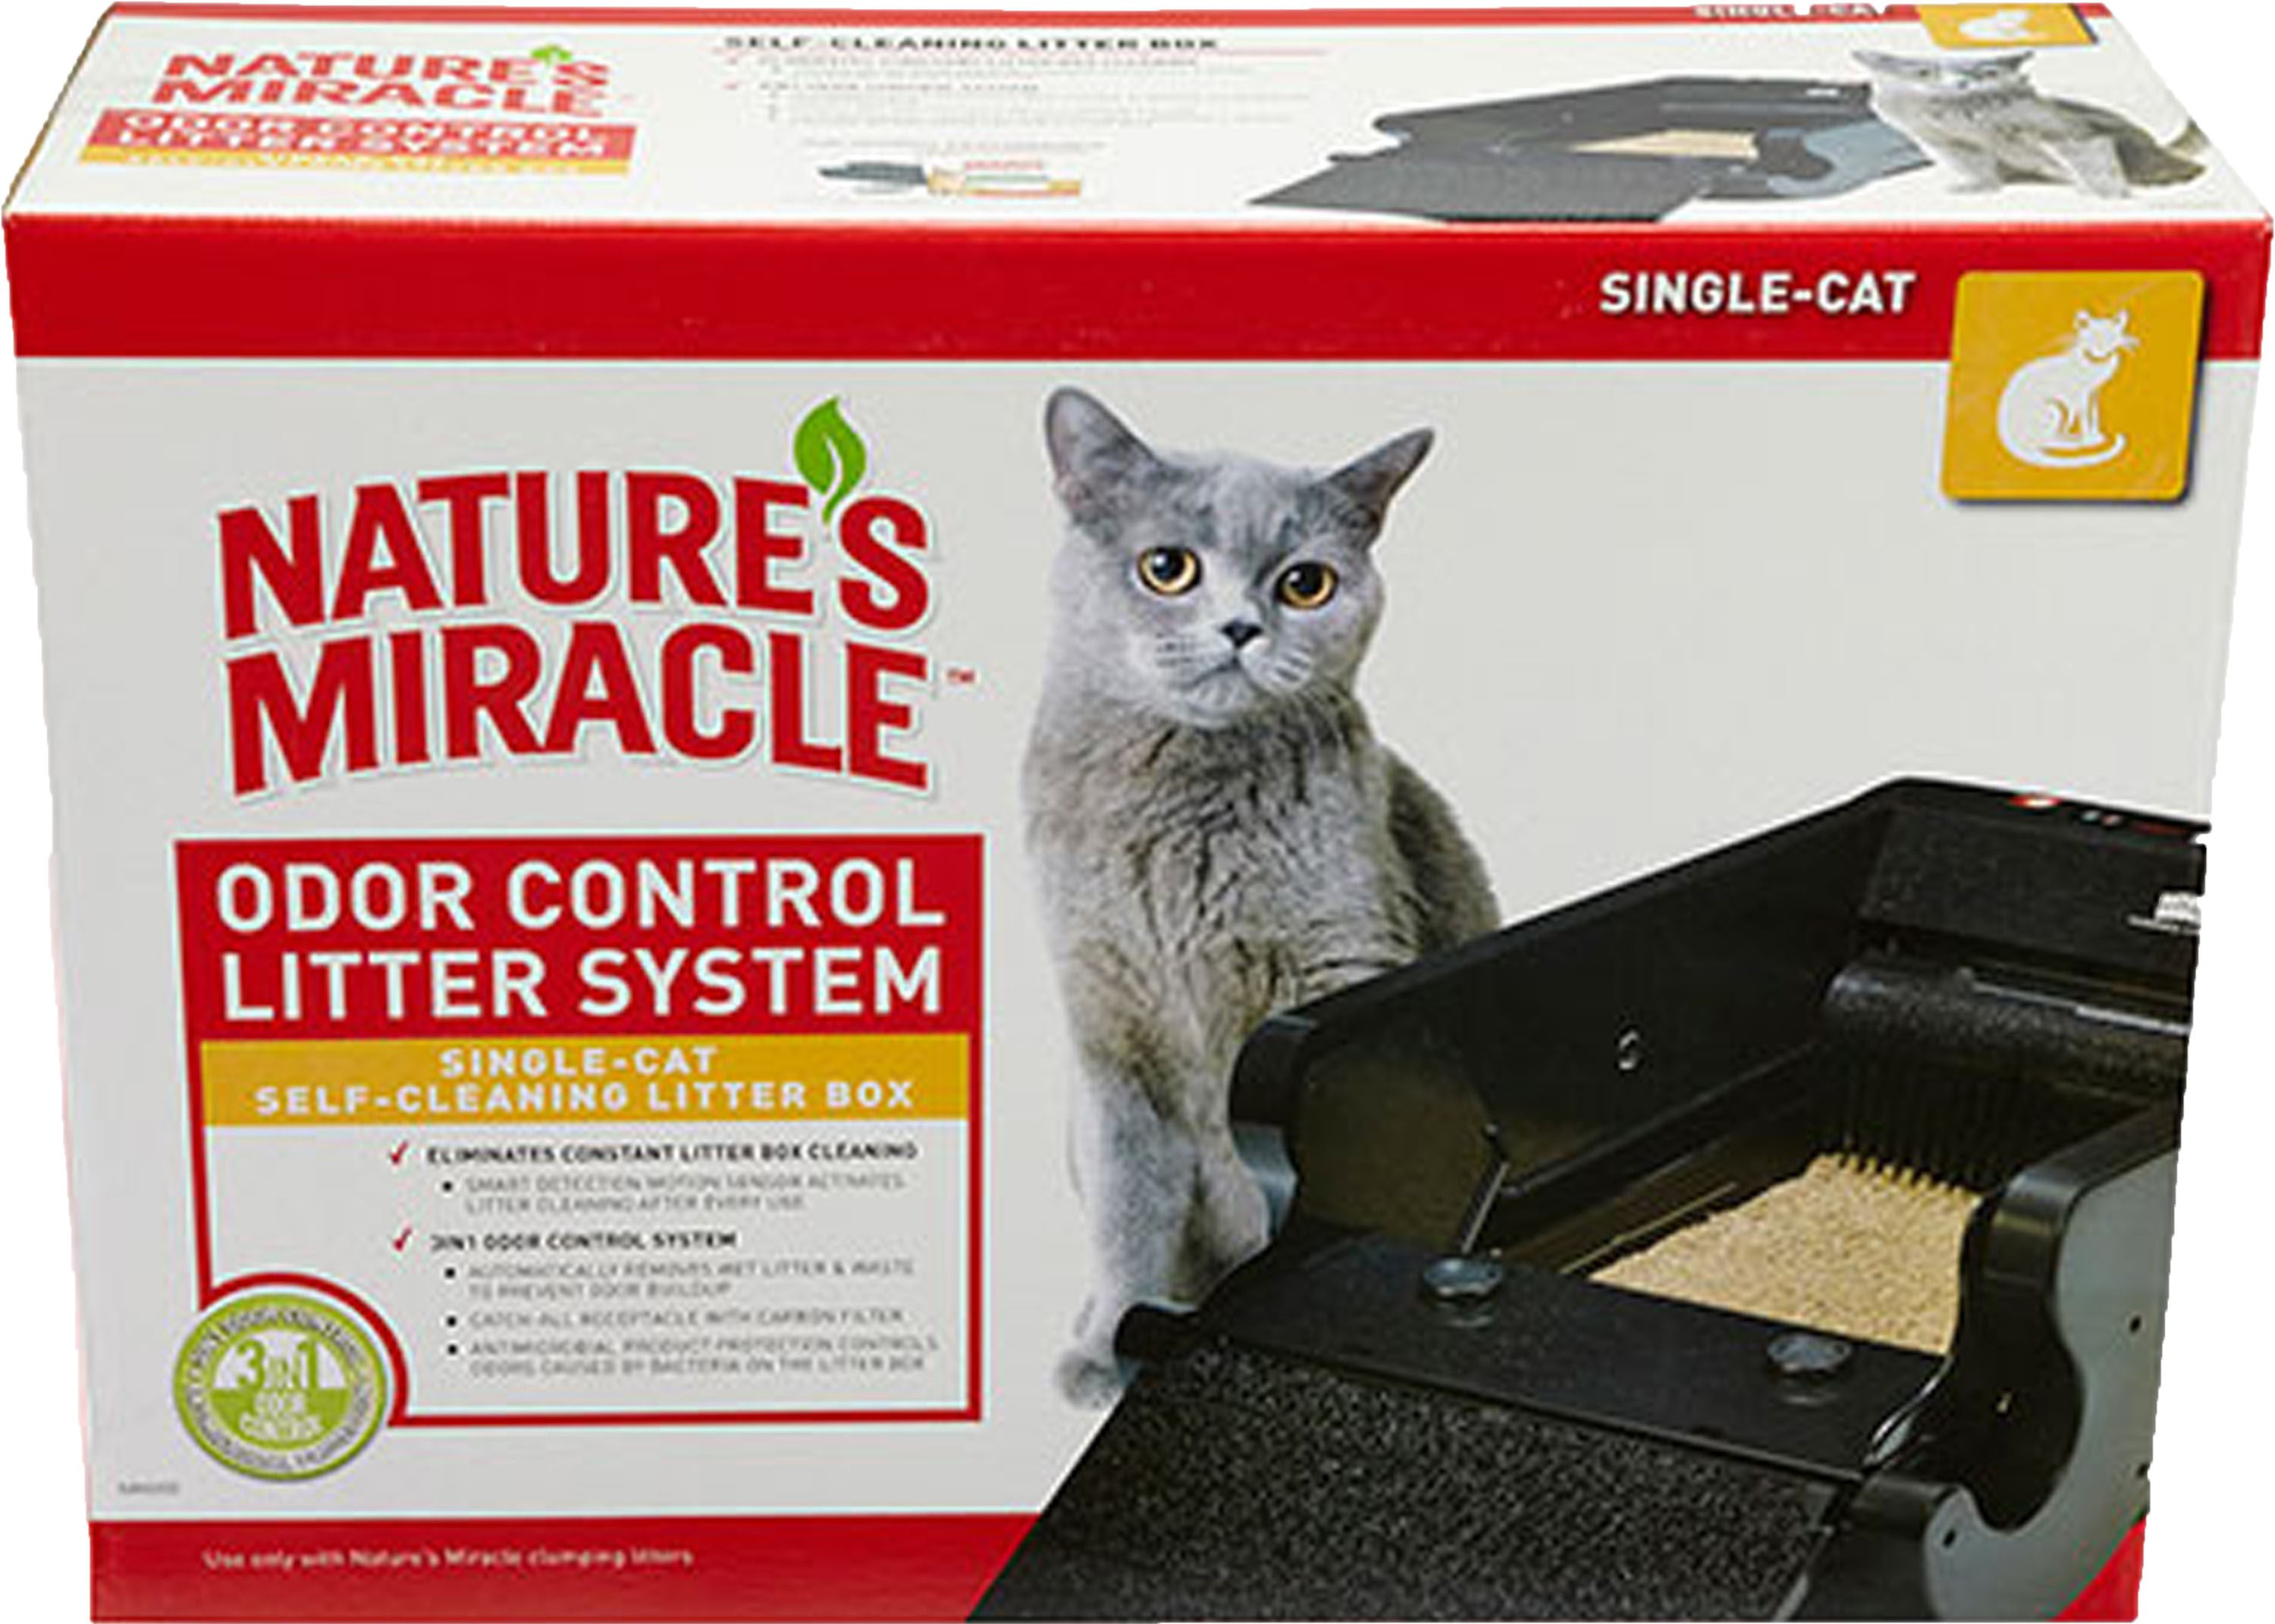 natures miracle multo cst self cleaning litter box reviews